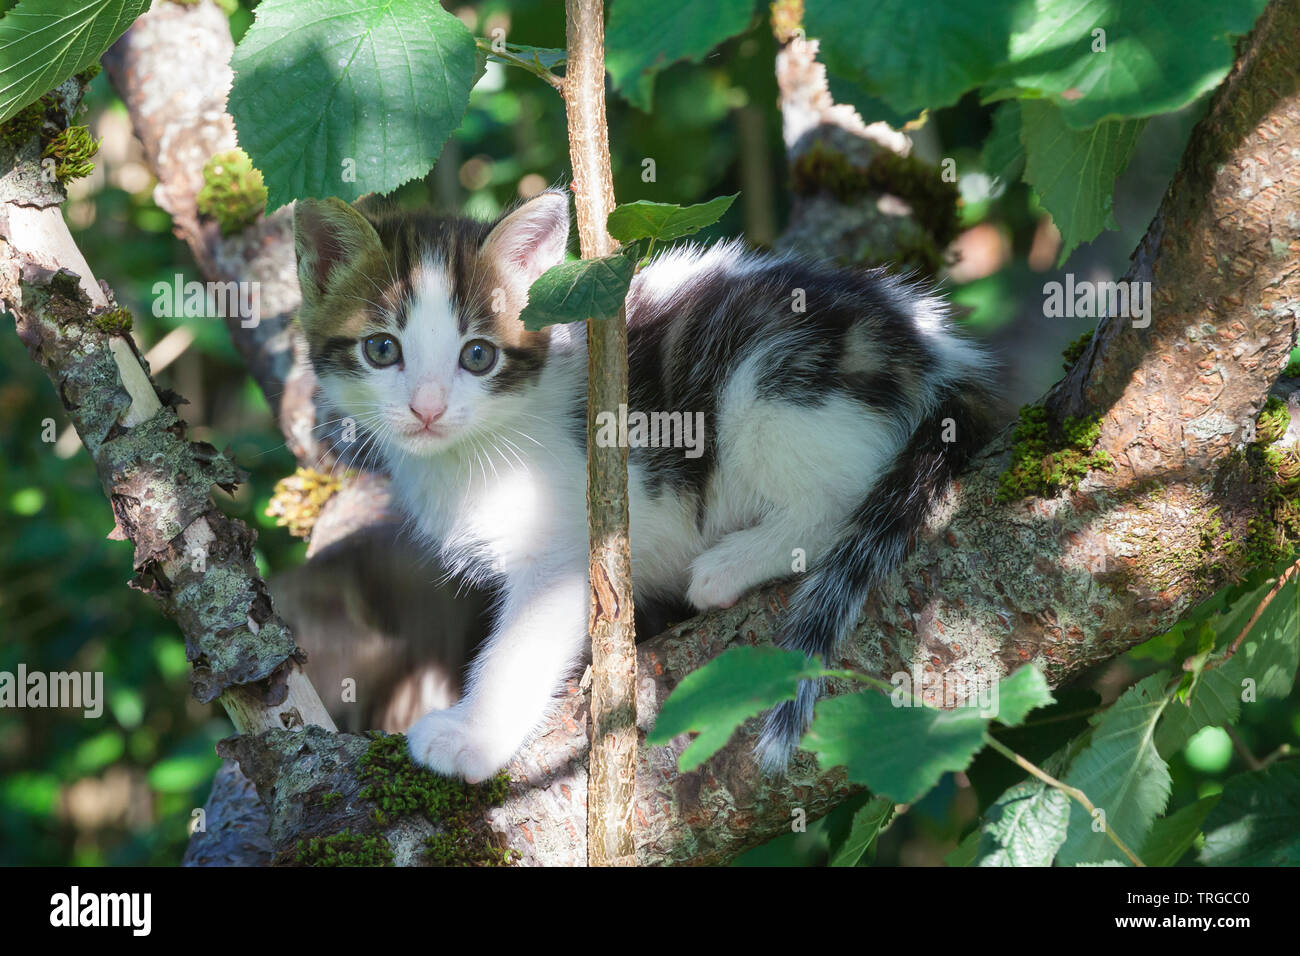 Small eight week old semi-feral kitten climbing a tree looking at the camera with huge round eyes, Stock Photo